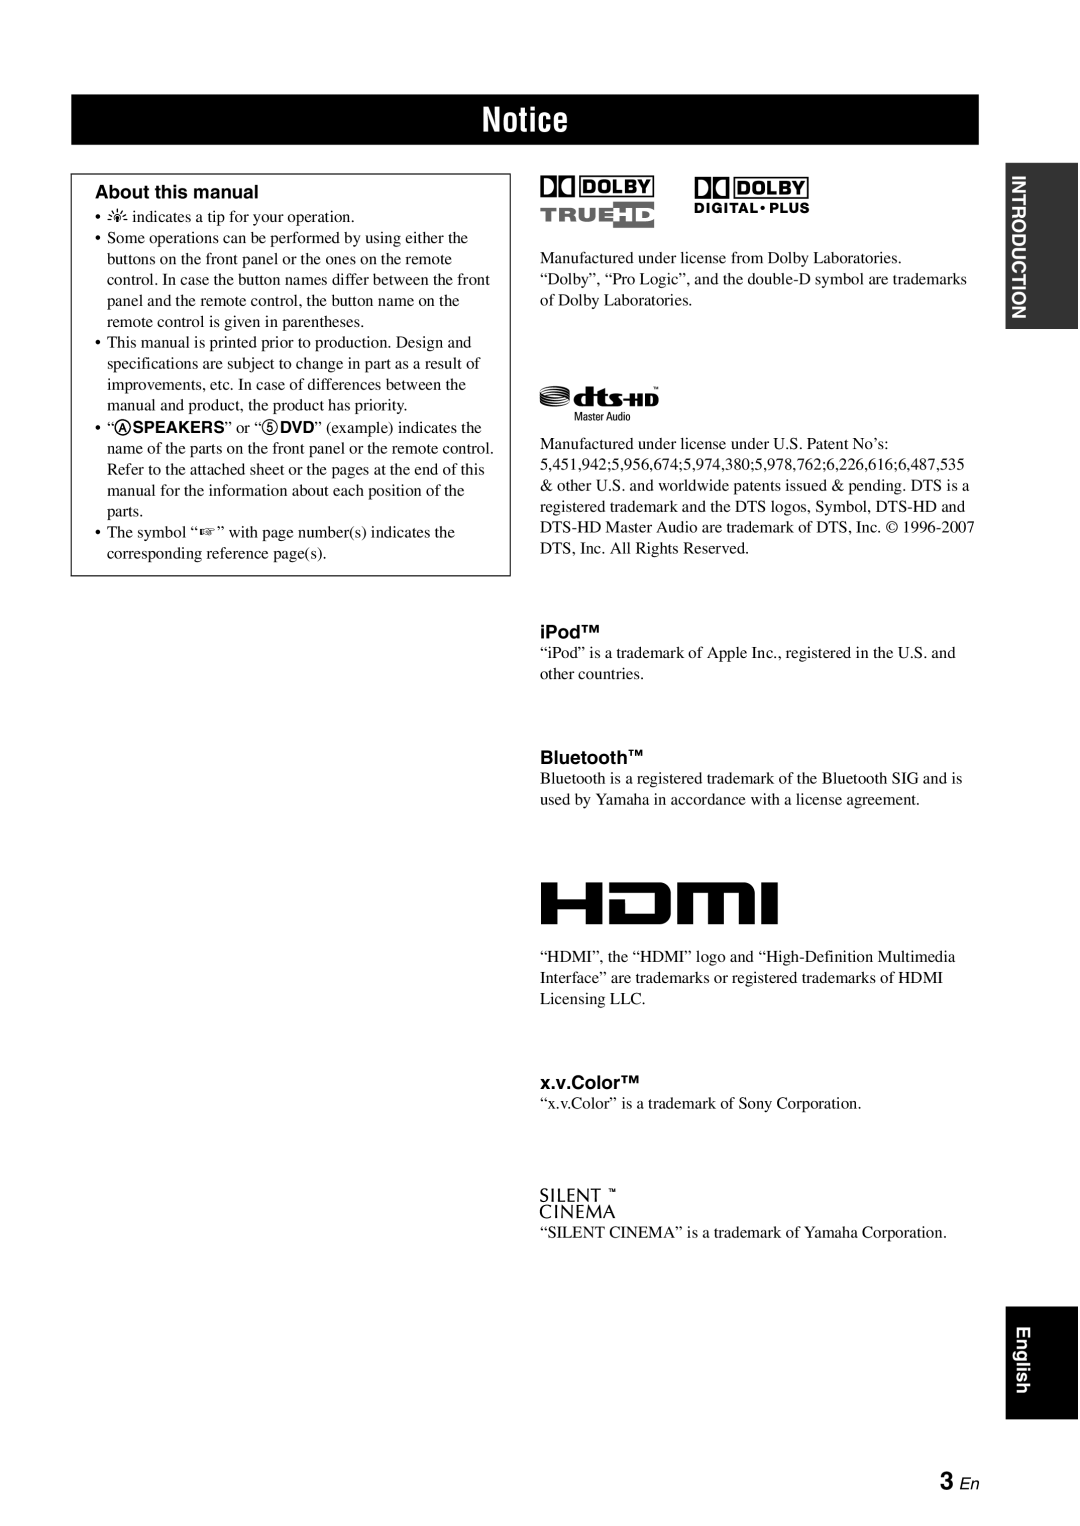 Yamaha DSP-AX863SE owner manual Notice, 3 En, About this manual, iPod, Bluetooth, x.v.Color 